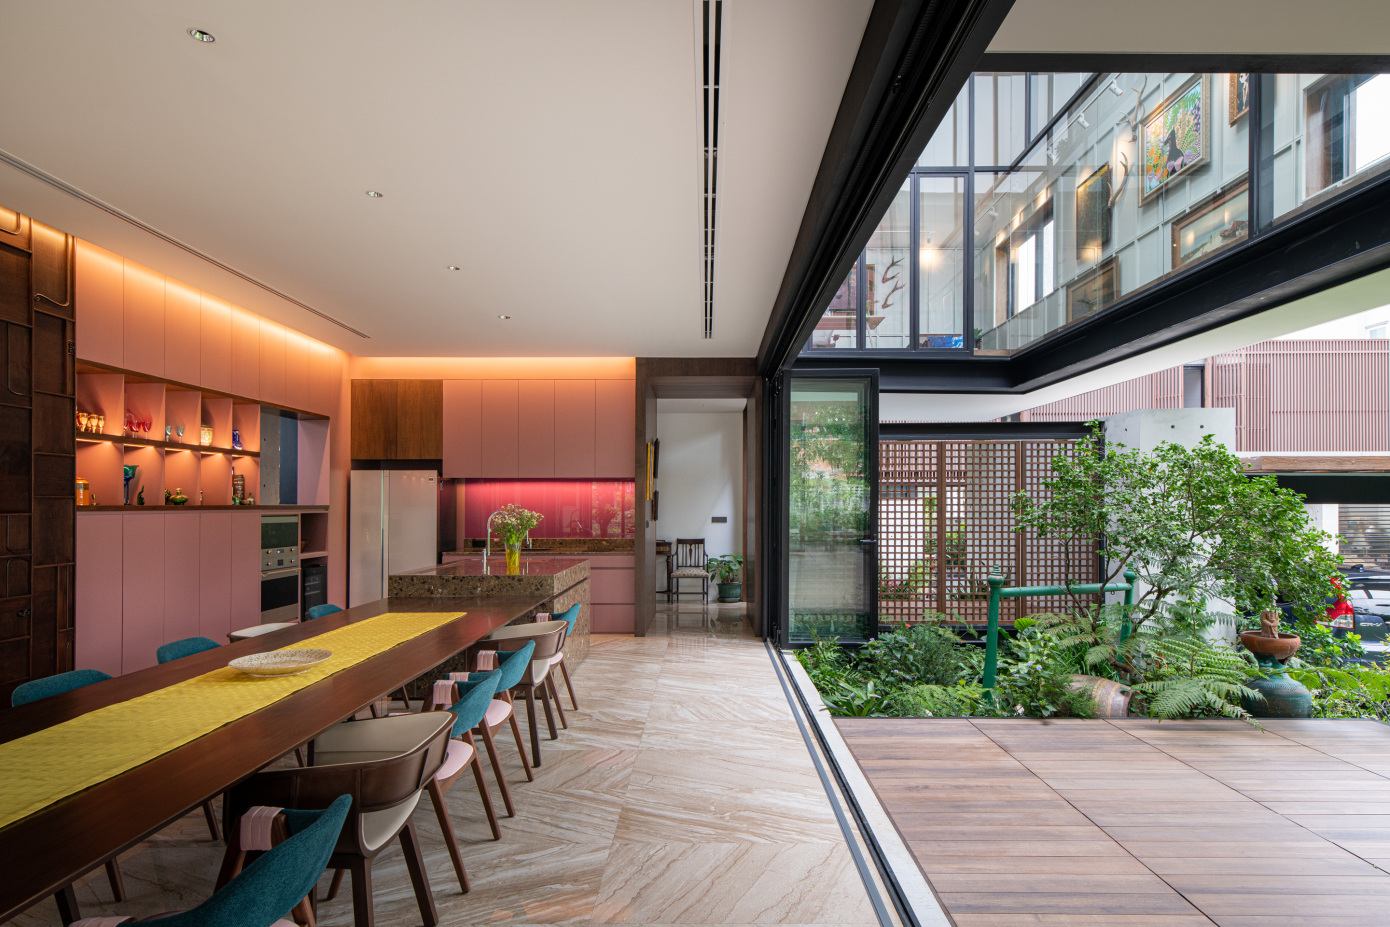 A Unique and Impressive Contemporary Home Amid Lush Greenery in Bangkok, Thailand by Maincourse Architect (4)